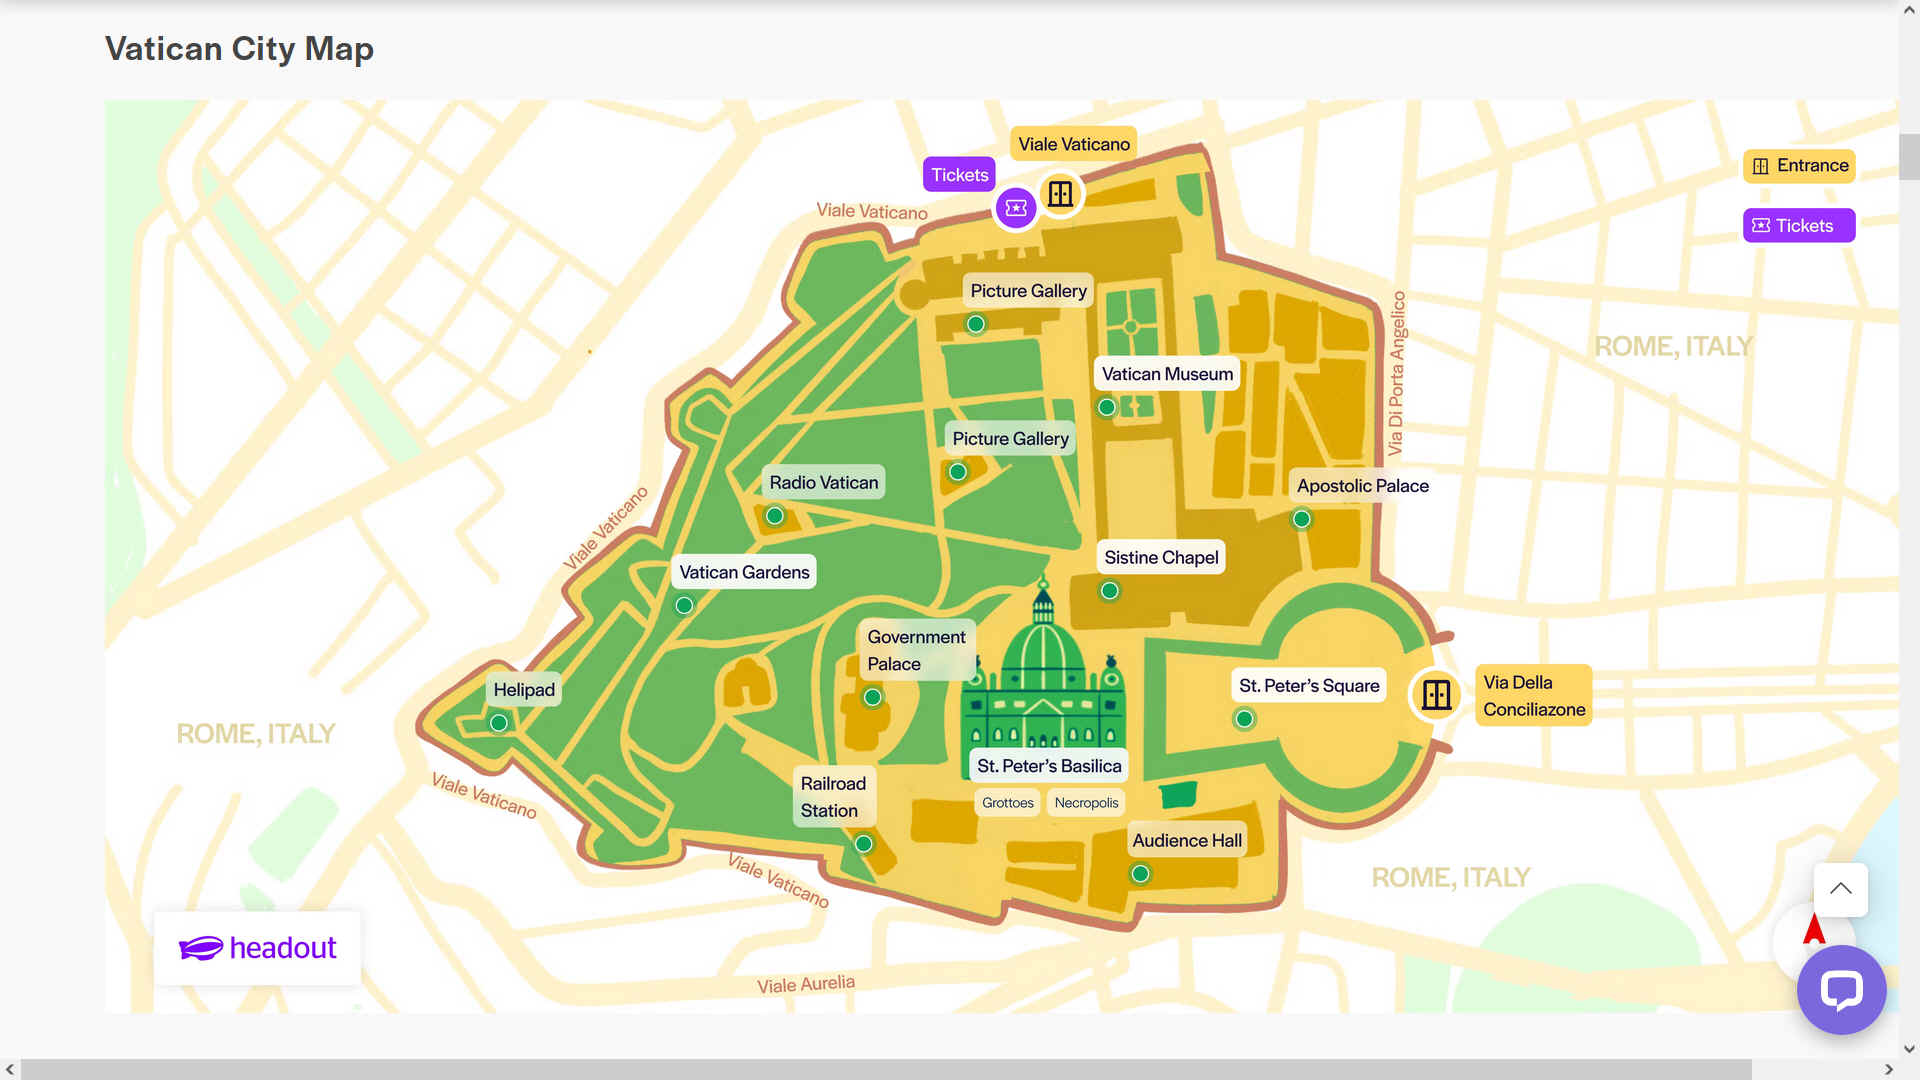 Map of the Vatican City, Saint Peter's Basilica and Square